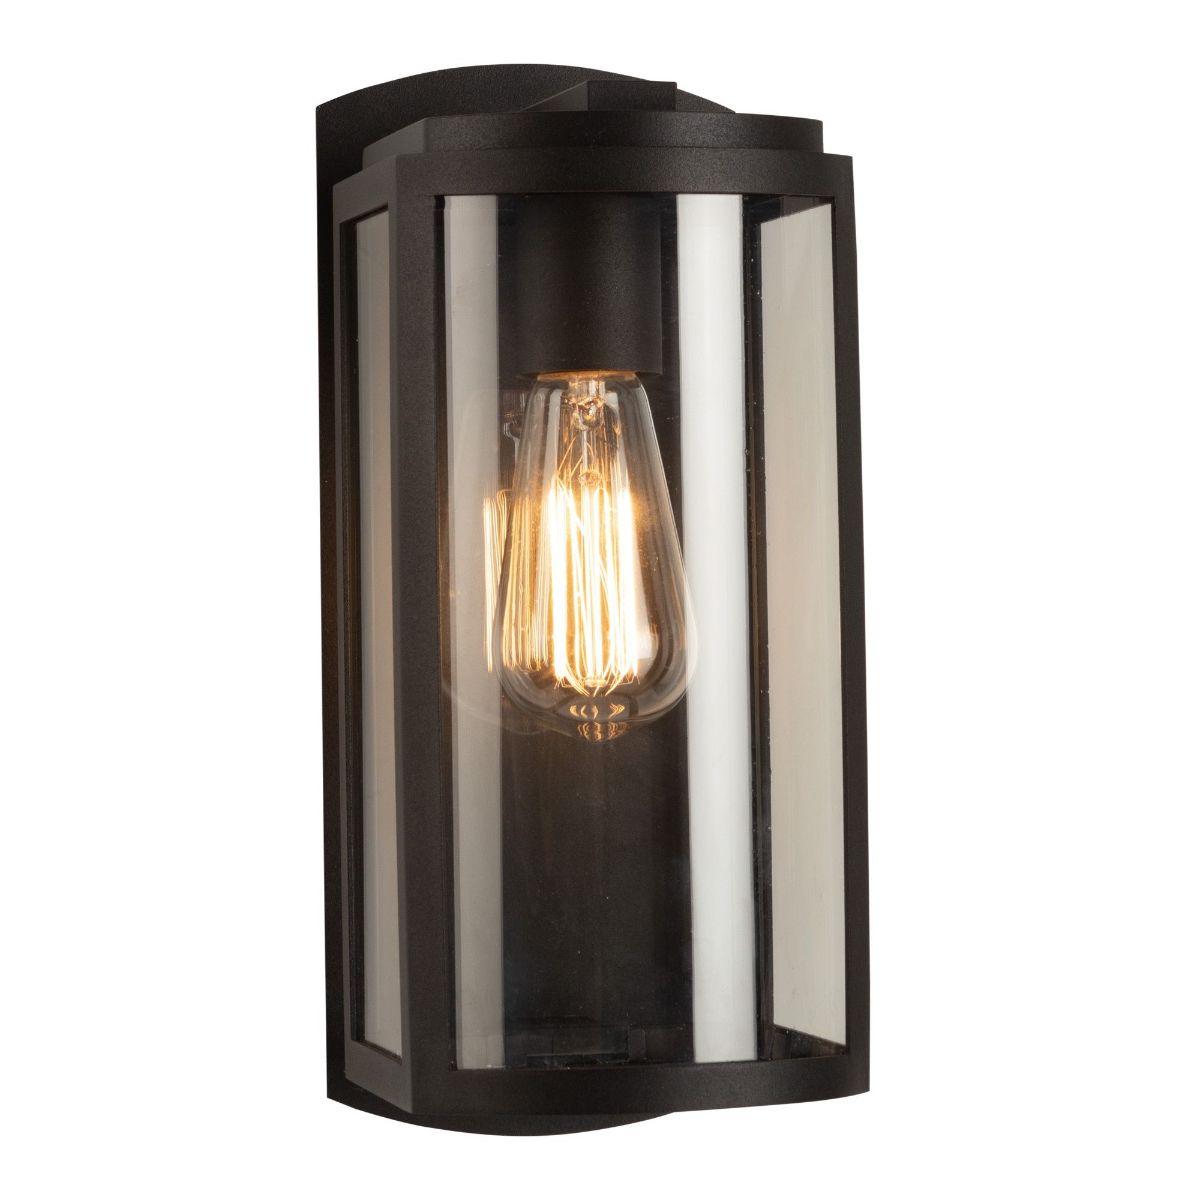 Lakewood 13 In. Outdoor Wall Light Matte Black Finish - Bees Lighting